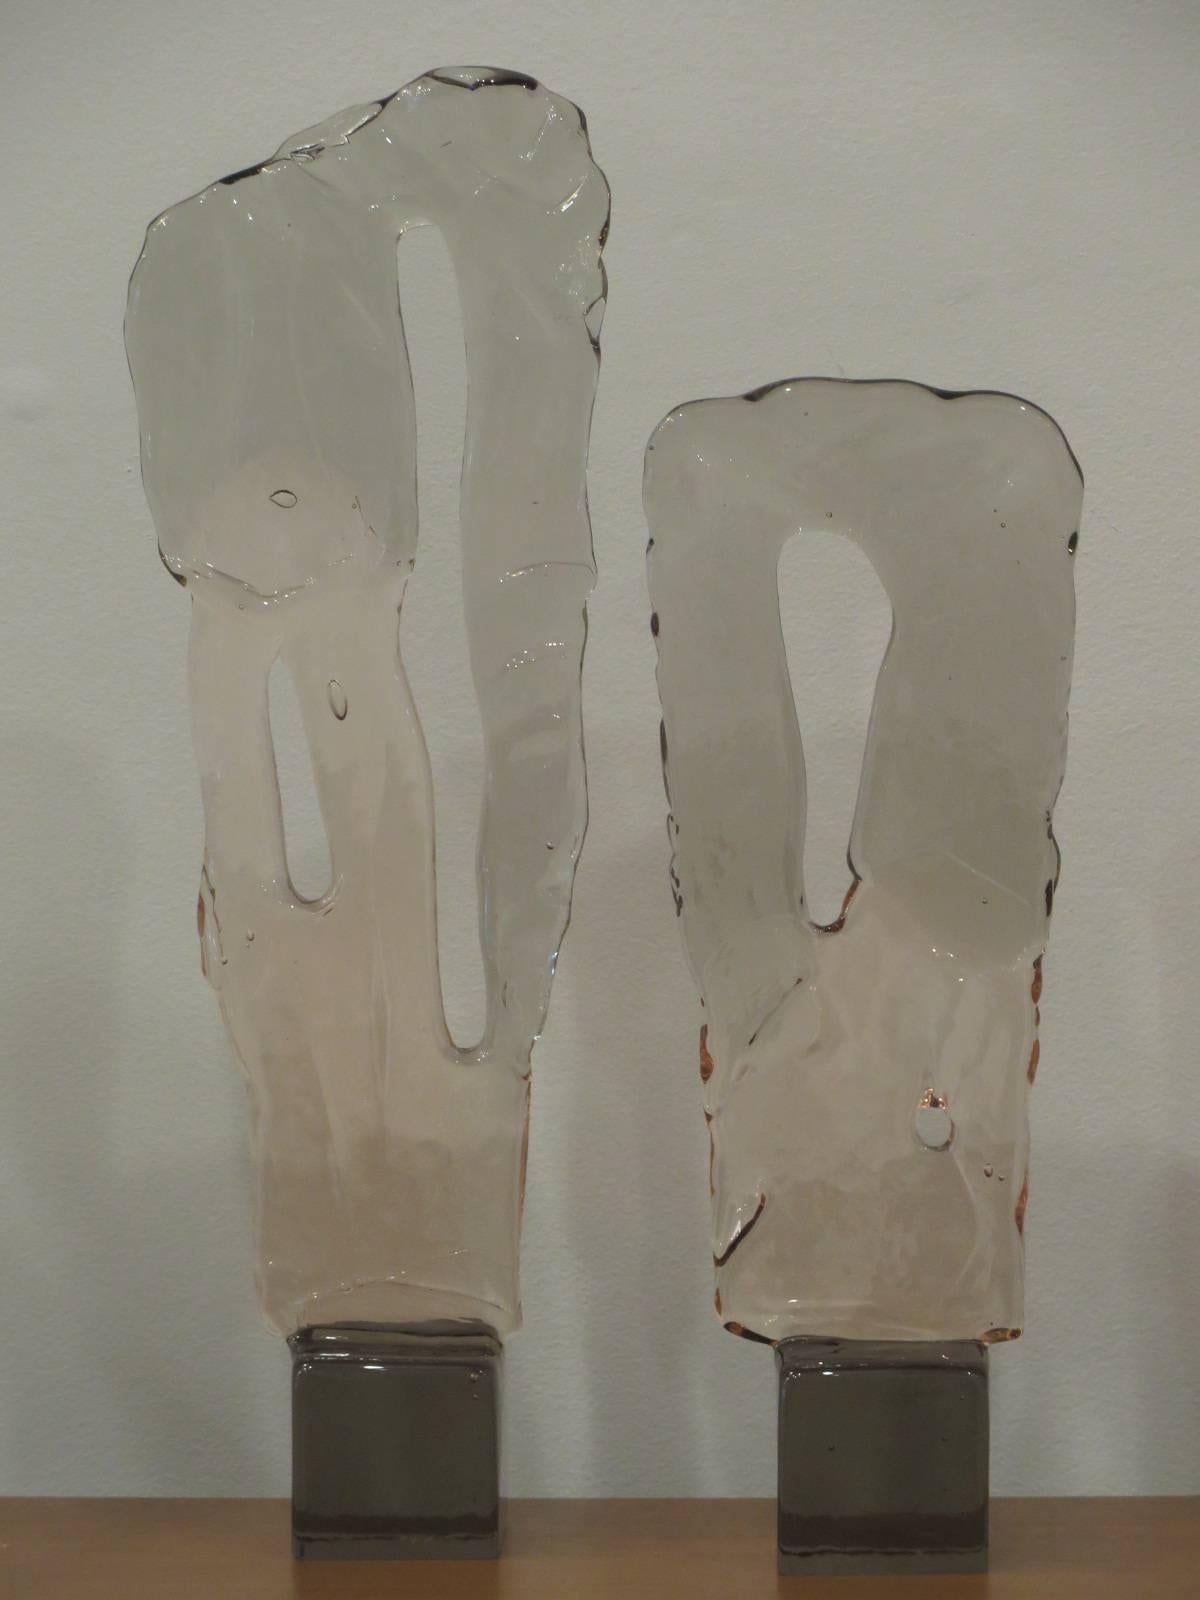 Pair of tall Murano glass sculptures signed L. Gaspari. Square base is Smokey gray graduating to pink and clear gray at the top.